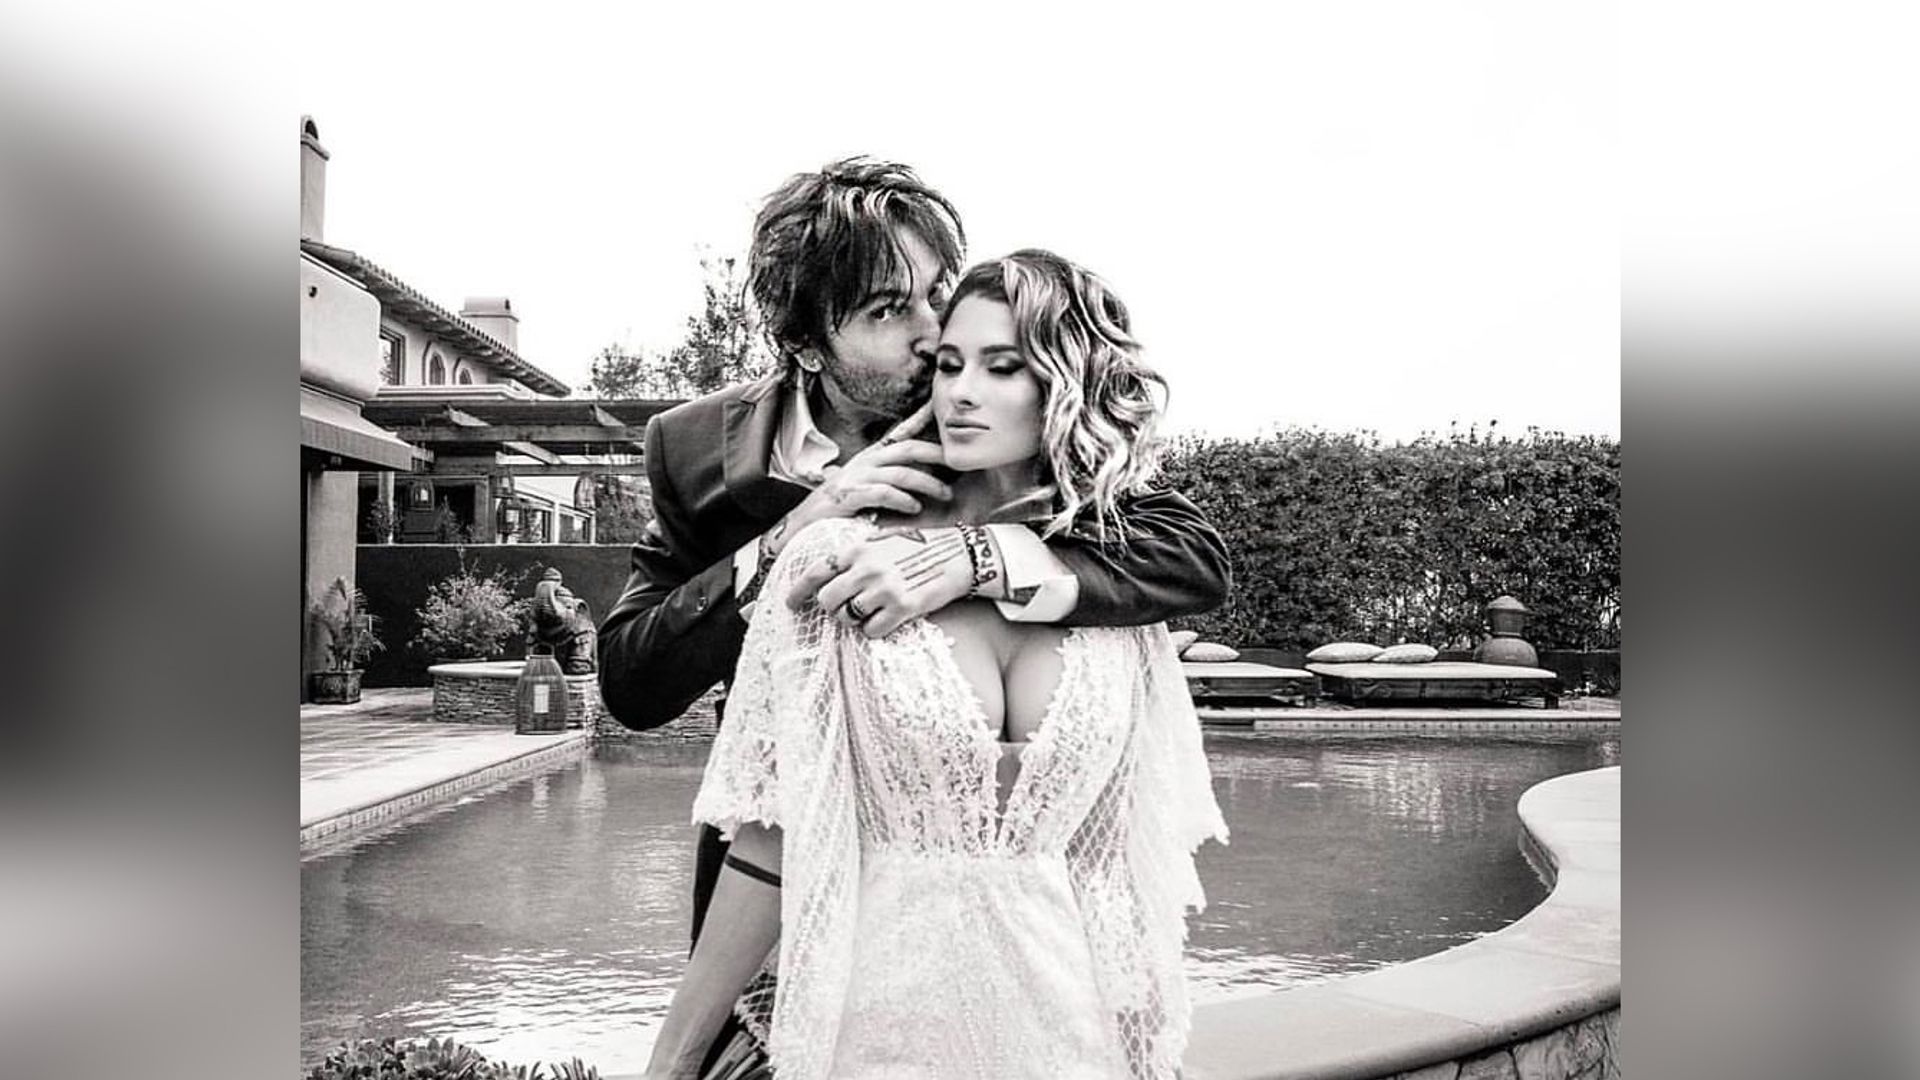 The wedding of Tommy Lee and Brittany Furlan